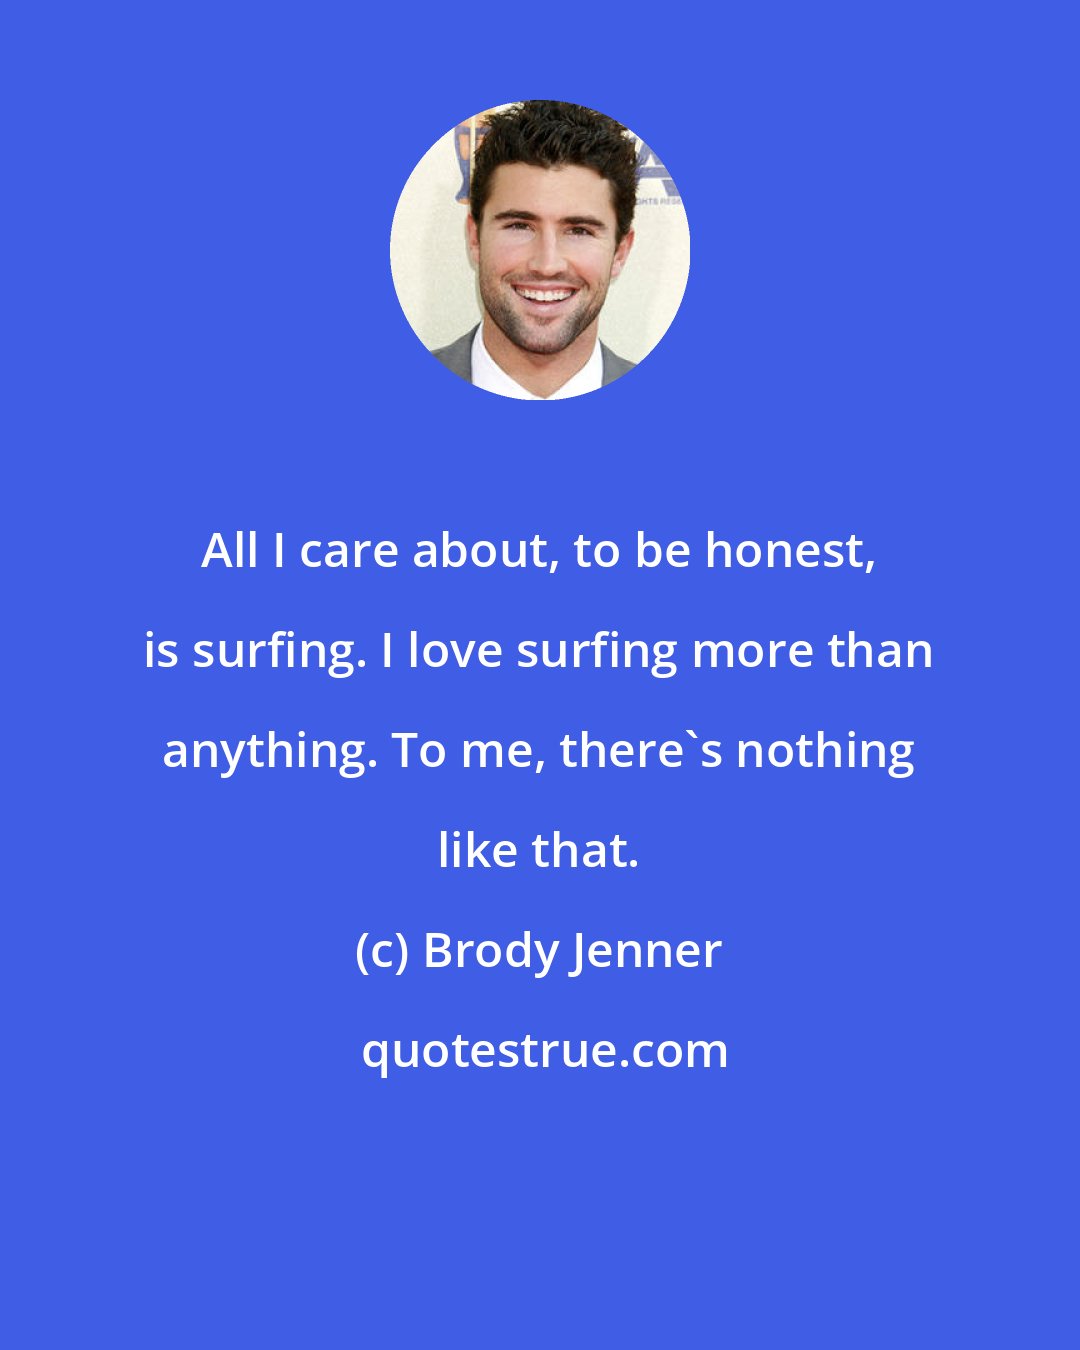 Brody Jenner: All I care about, to be honest, is surfing. I love surfing more than anything. To me, there's nothing like that.